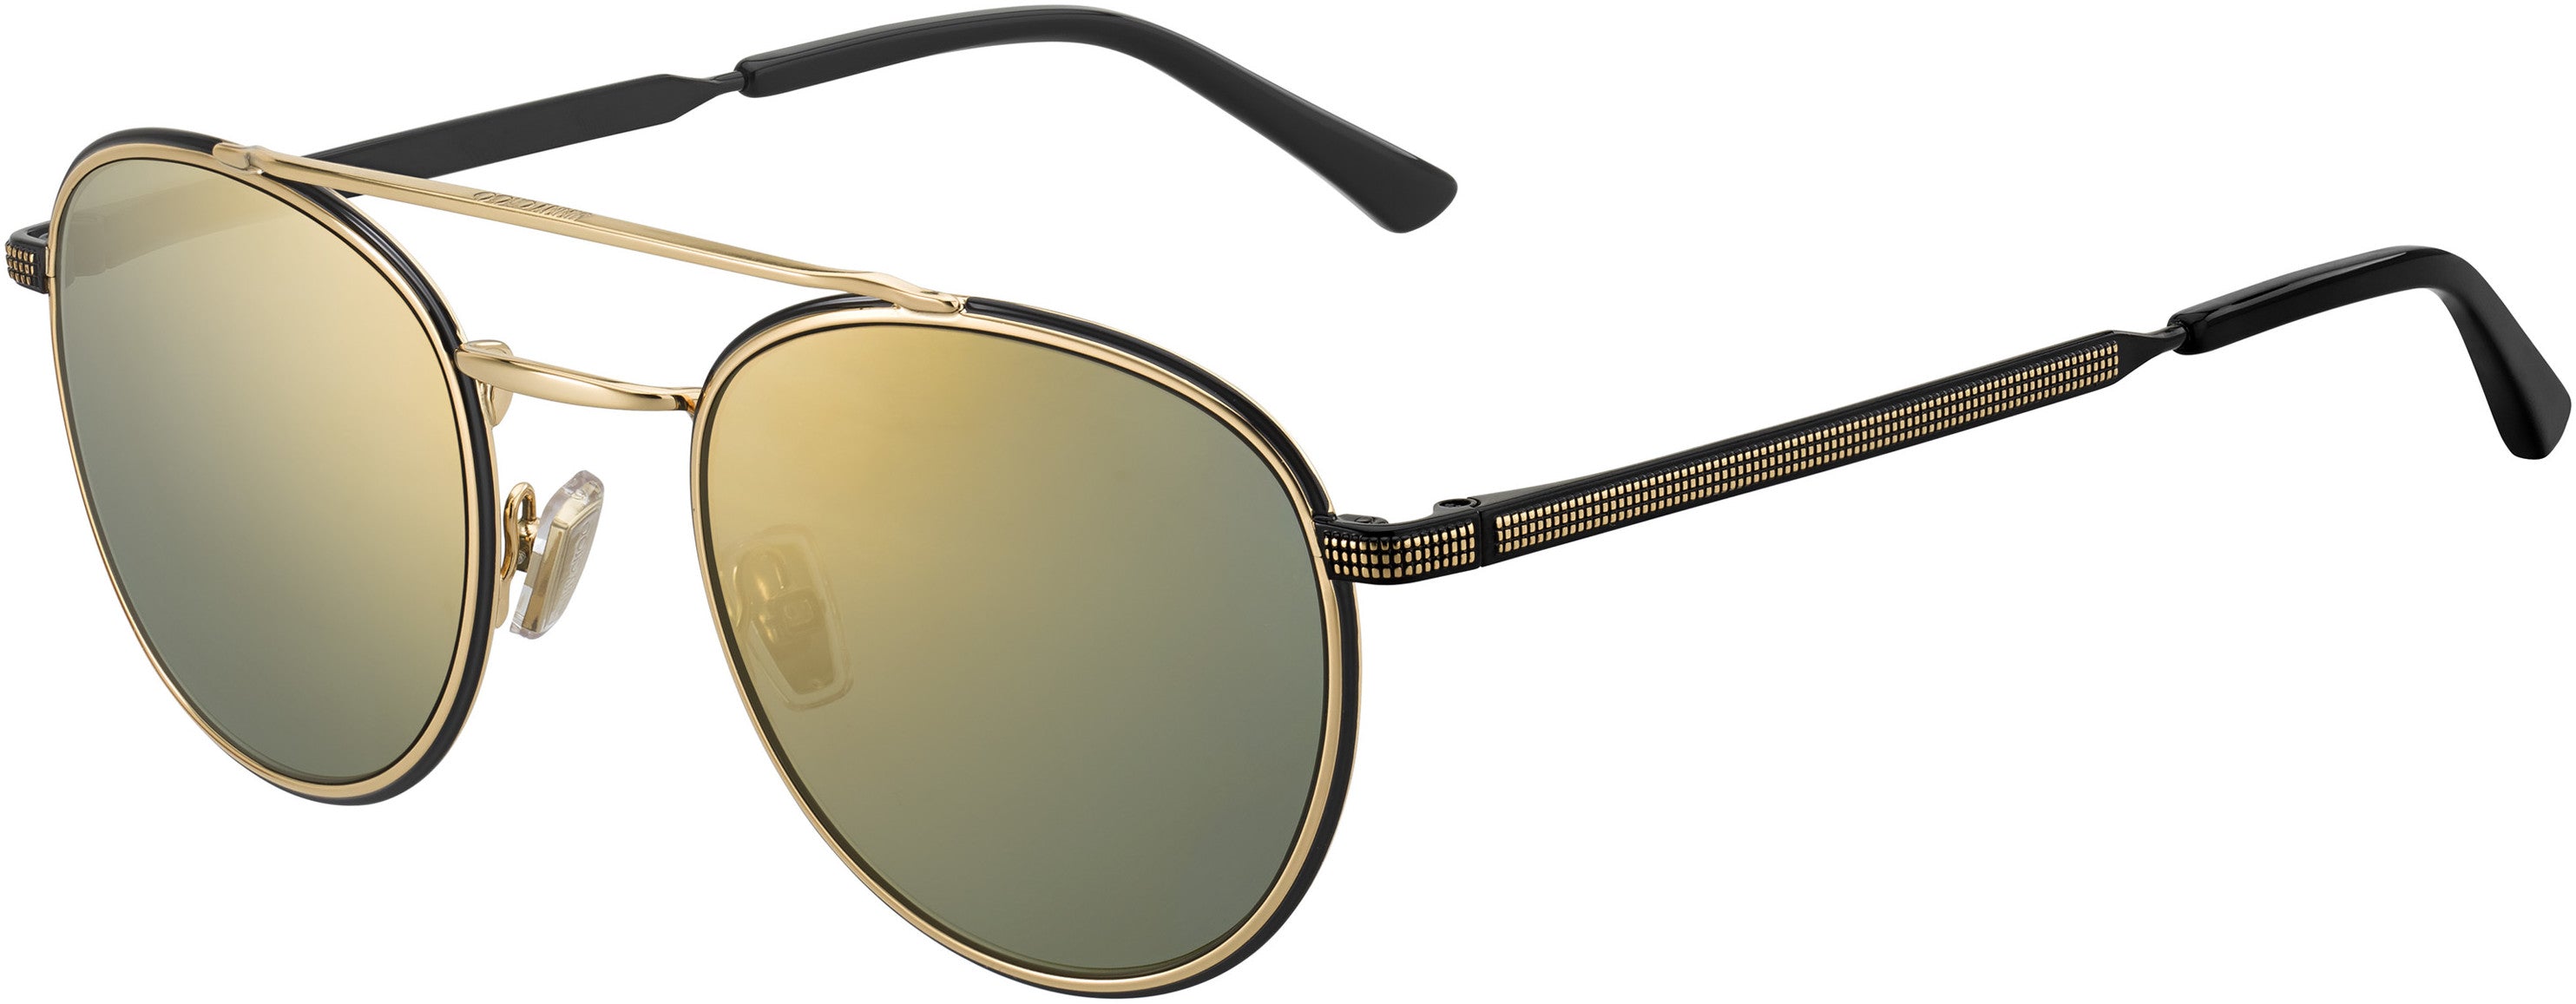 Jimmy Choo Dave/S Oval Modified Sunglasses 02M2-02M2  Black Gold (K1 Gold Mirror)